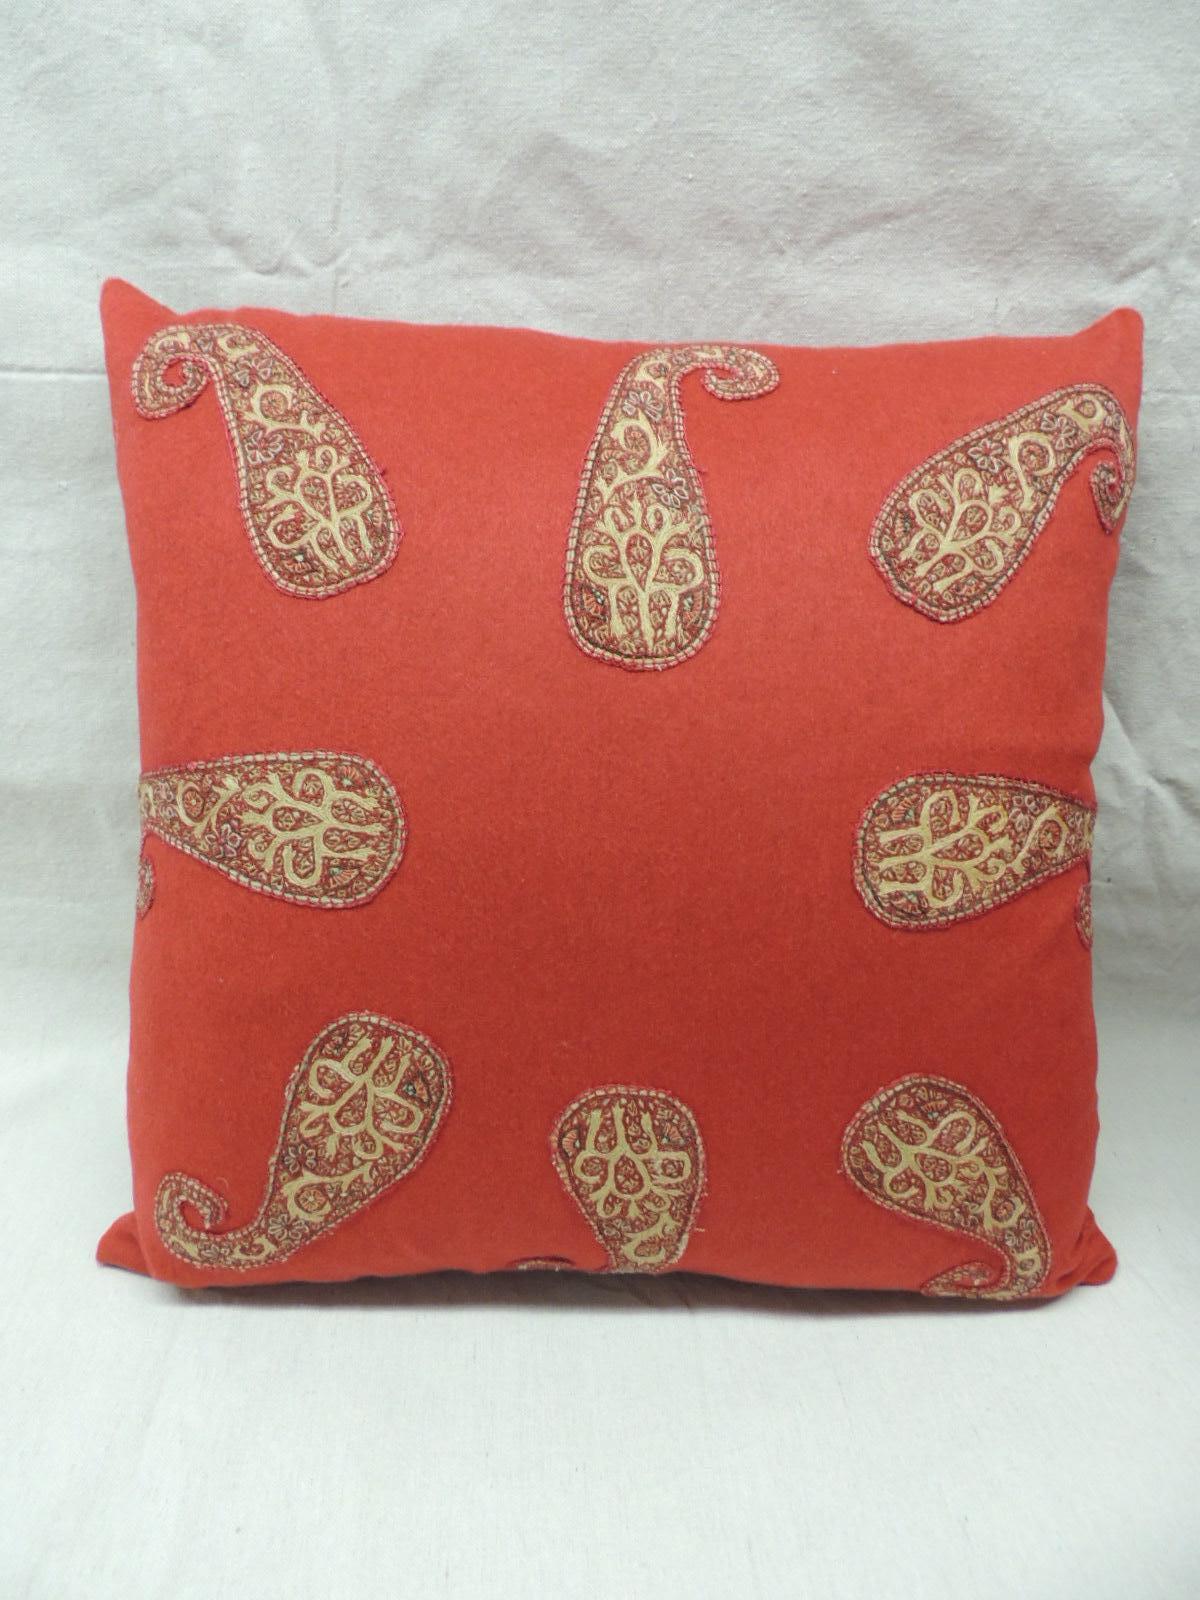 Pair of red Persian paisley hand-applique embroidered paisleys onto a red wool carriage cloth textile. 
Throw pillows finished with a small Rubelli silk velvet backings. 
Pillows handmade and designed in the USA. 
Closure by stitch (no zipper) with